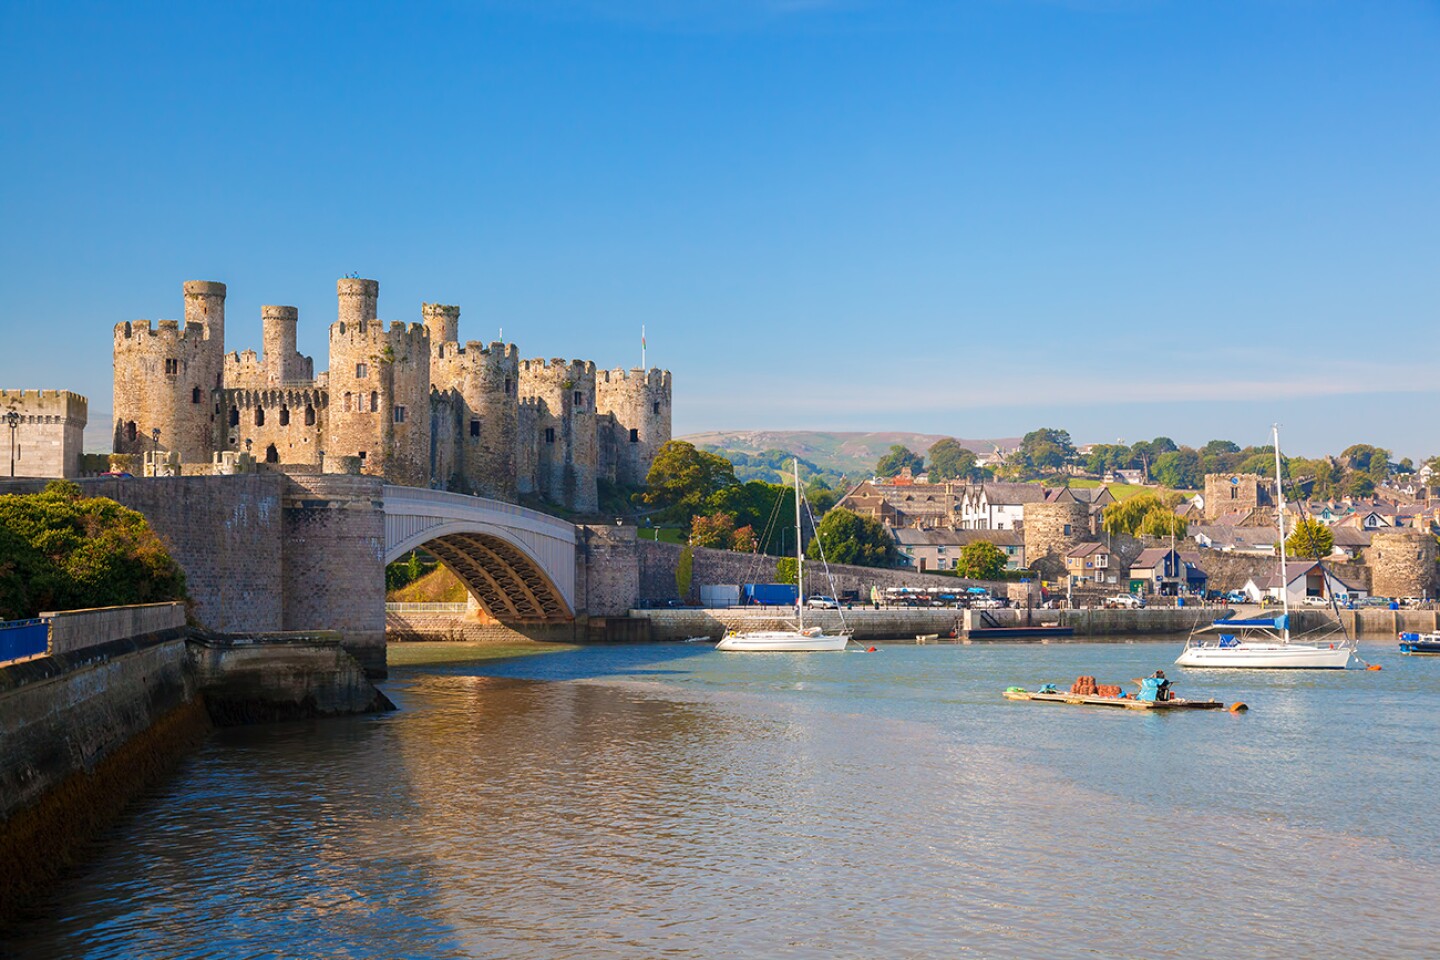 <h2>10. Conwy Castle</h2> <p><i>Conwy, Wales</i></p> <p>Gazing at this vast, imposing stone fortress—one of four Welsh strongholds that Edward I of England constructed during his conquest of Wales—it’s hard to believe that it was built in just four years, between 1283 and 1287. With eight massive round towers, <a class="Link" href="https://cadw.gov.wales/visit/places-to-visit/conwy-castle" rel="noopener">Conwy Castle</a> sits on a promontory above the walled town of Conwy in North Wales, strategically overlooking two rivers and the harbor. Much of the interior is roofless, but the medieval royal apartments, which include the king’s chamber and a small chapel, are well-preserved. No tours are offered, but signage posted throughout provides historical information. Clamber around the battlements and climb the spiral staircases to the top of the towers for impressive views of the surrounding mountains of Snowdonia.</p> <h3>How to visit Conwy Castle</h3> <p>The castle can be reached along the 870-mile-long Wales Coast Path walking trail; for the less intrepid, the closest major city is Liverpool, less than two hours by train or car. The castle is about a half-mile from the Conwy train station or there is on-site parking. </p>